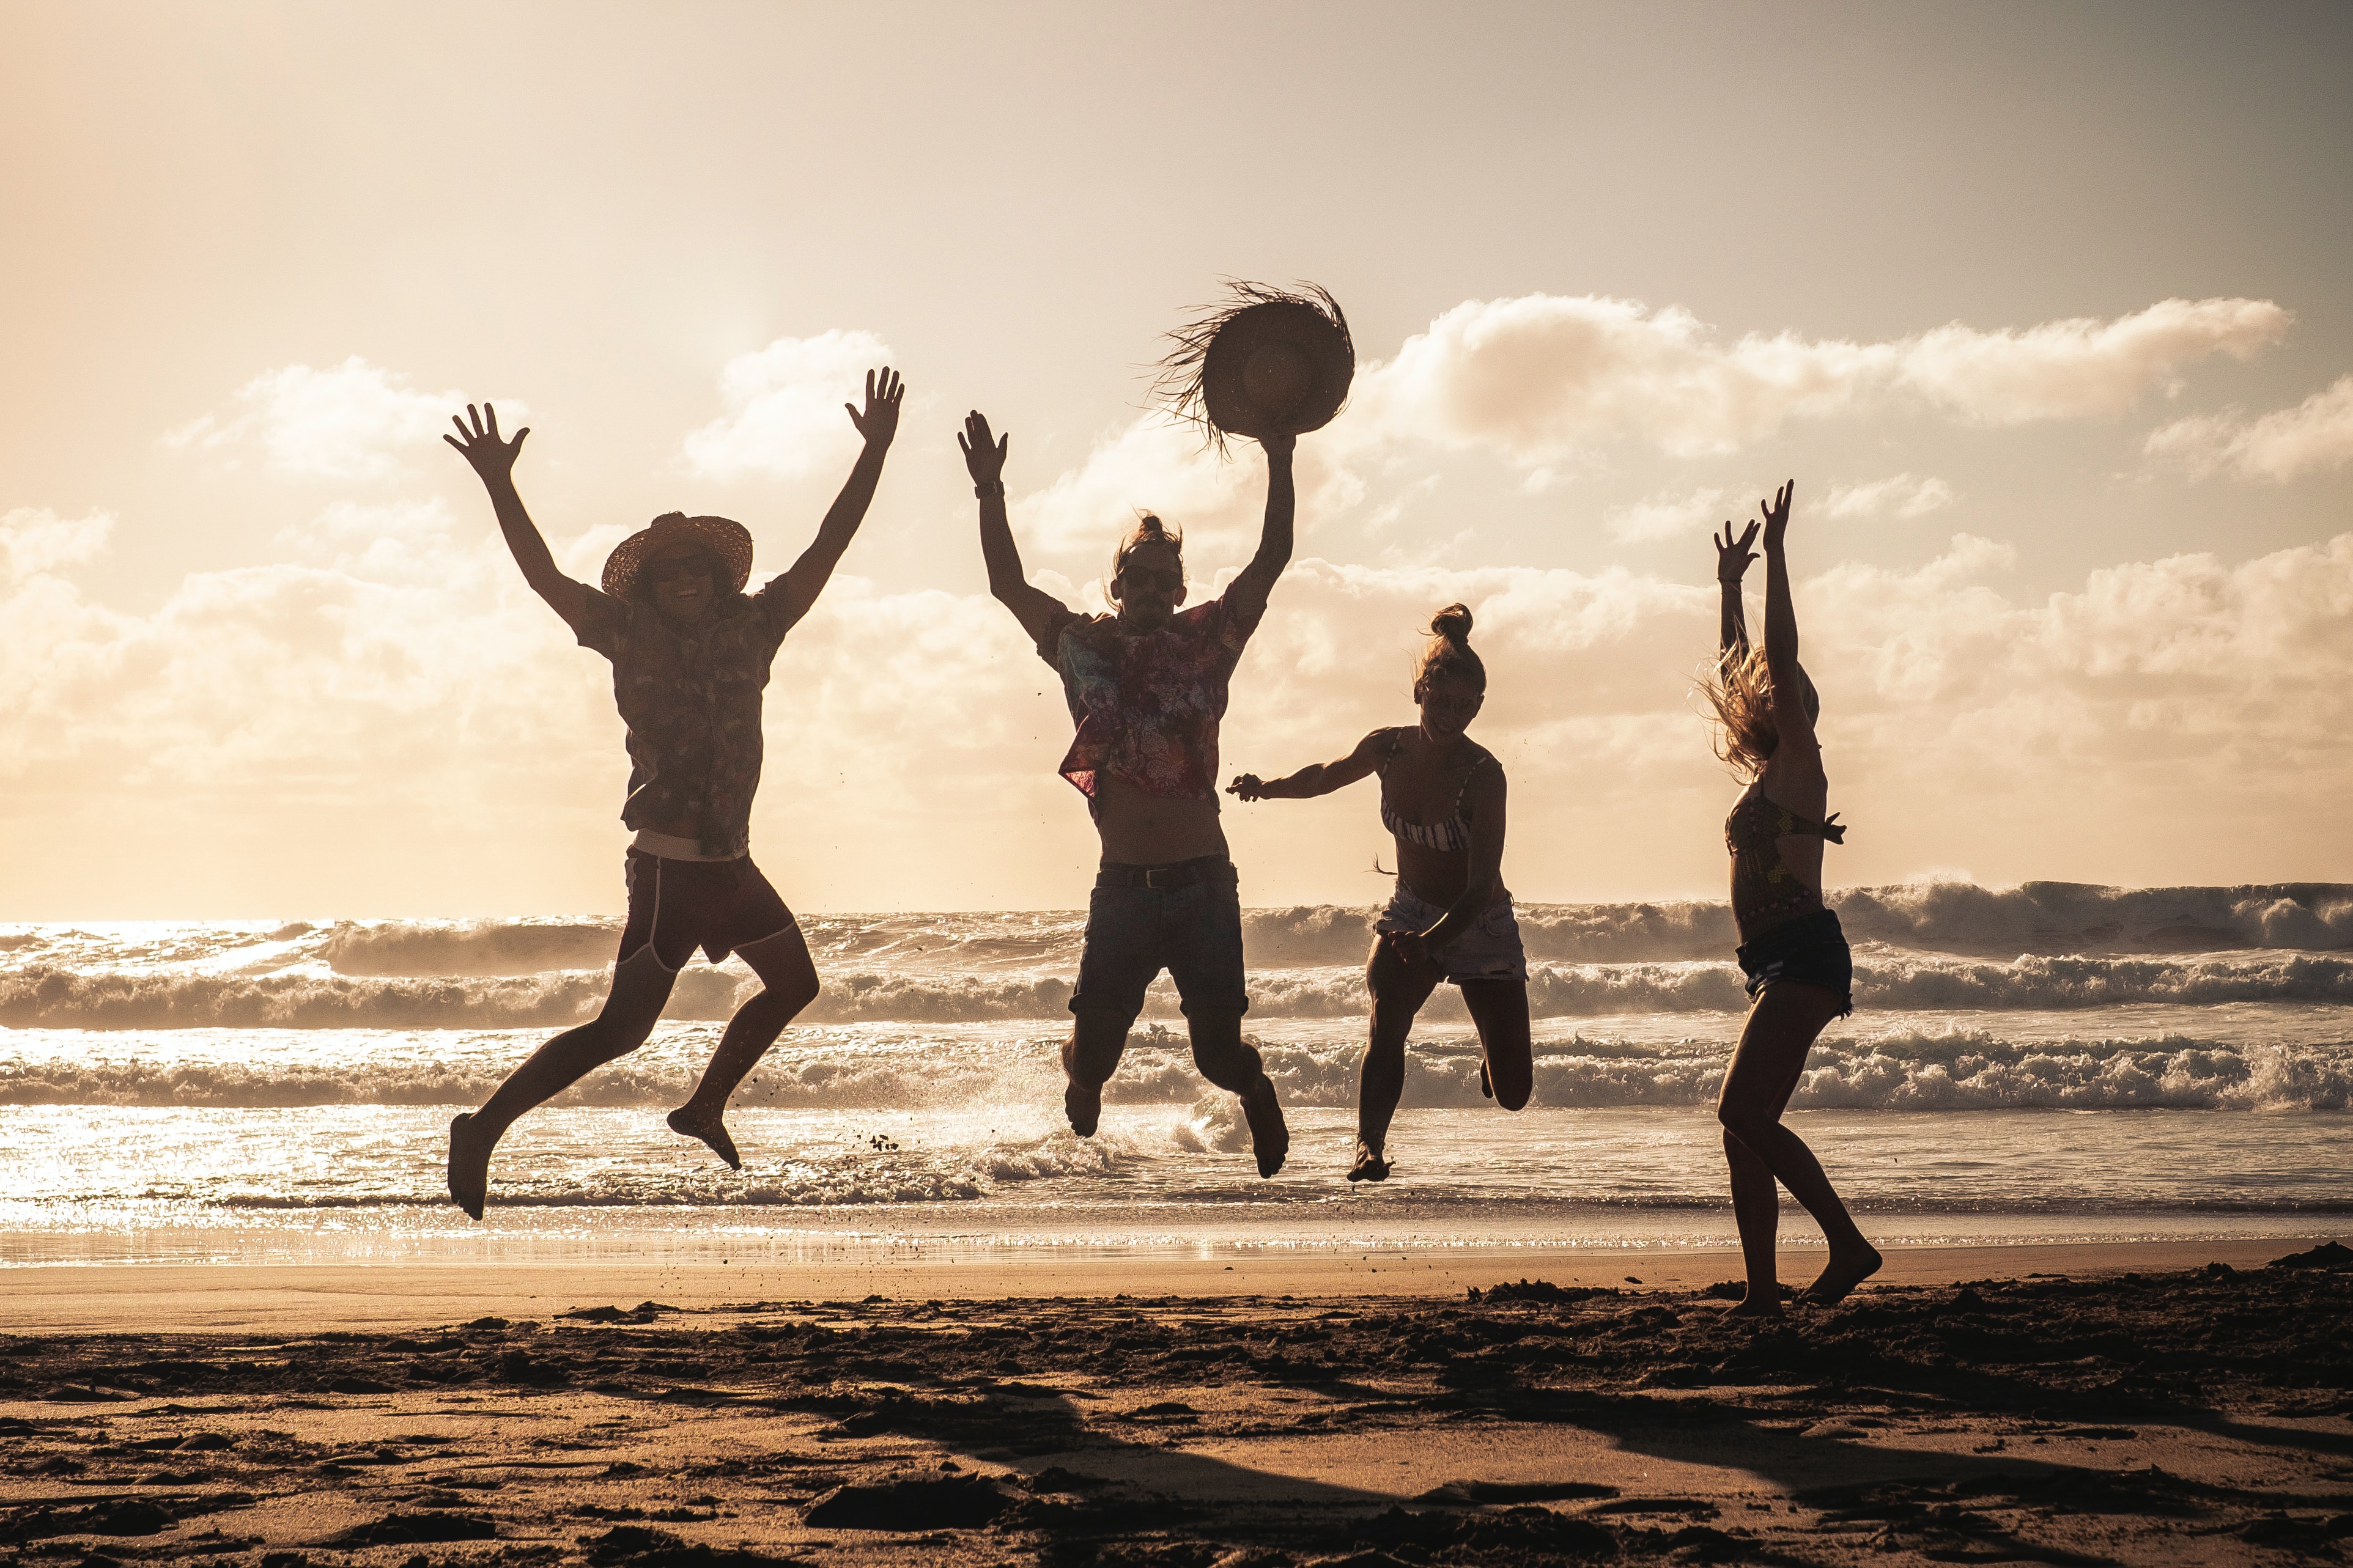 People jumping together on a beach